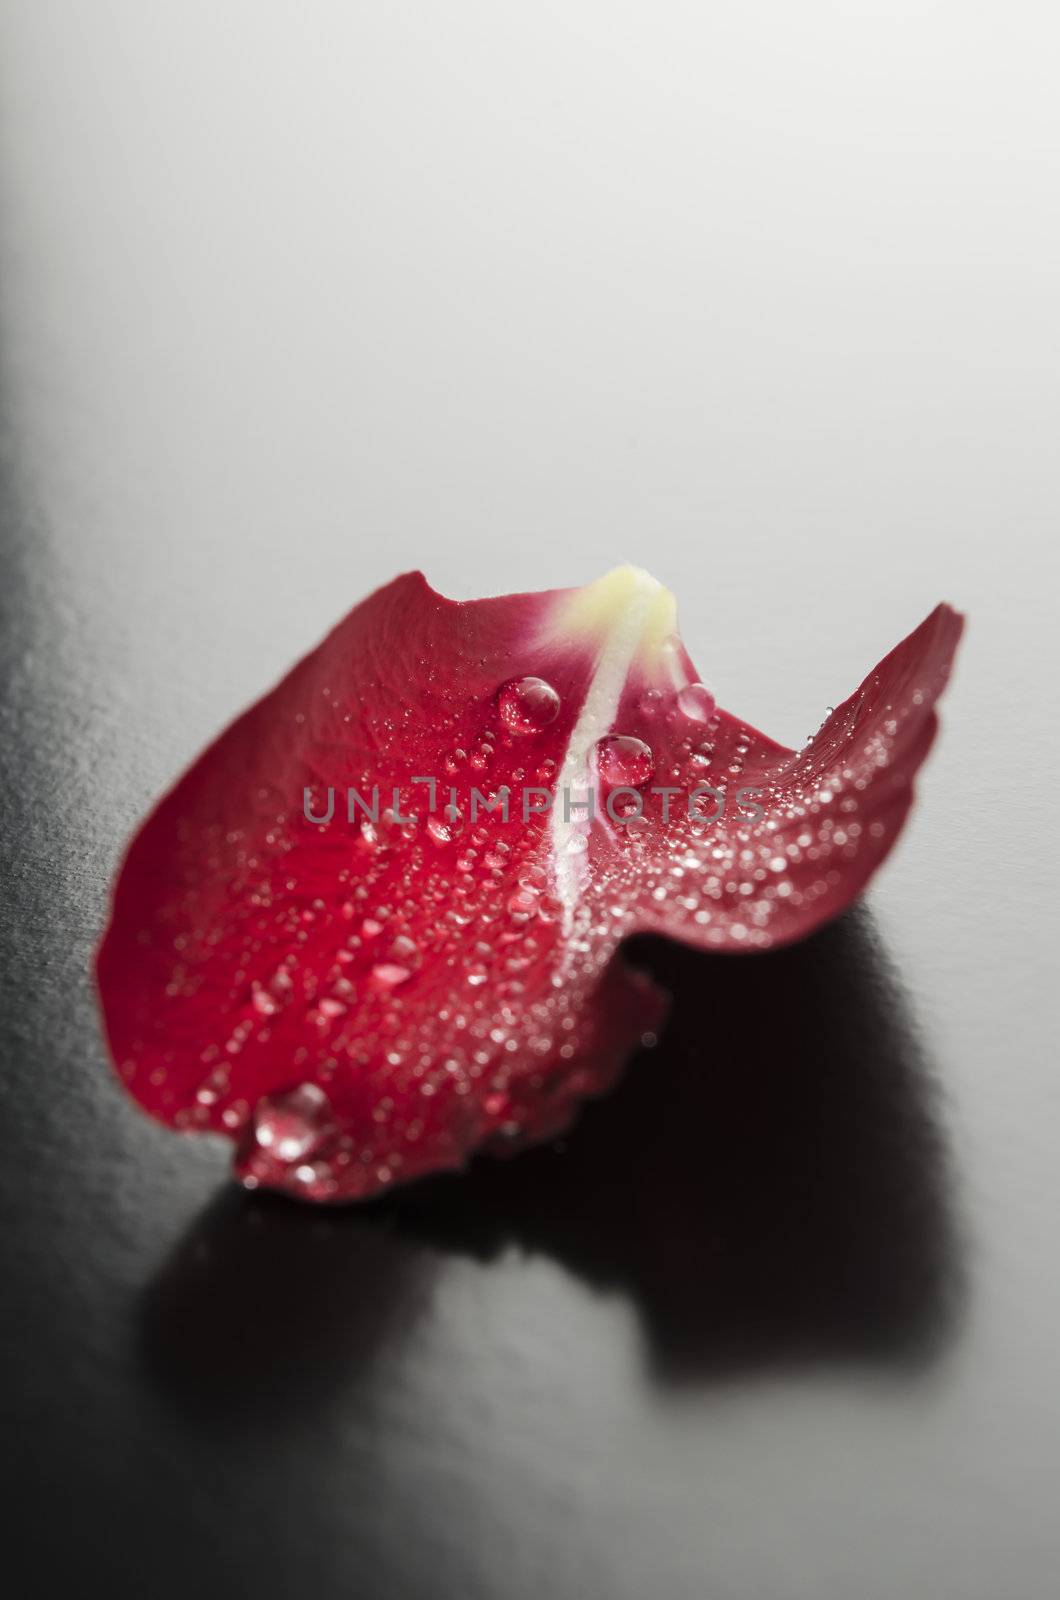 Closeup of a red rose petal with dew drops representing romance concept.